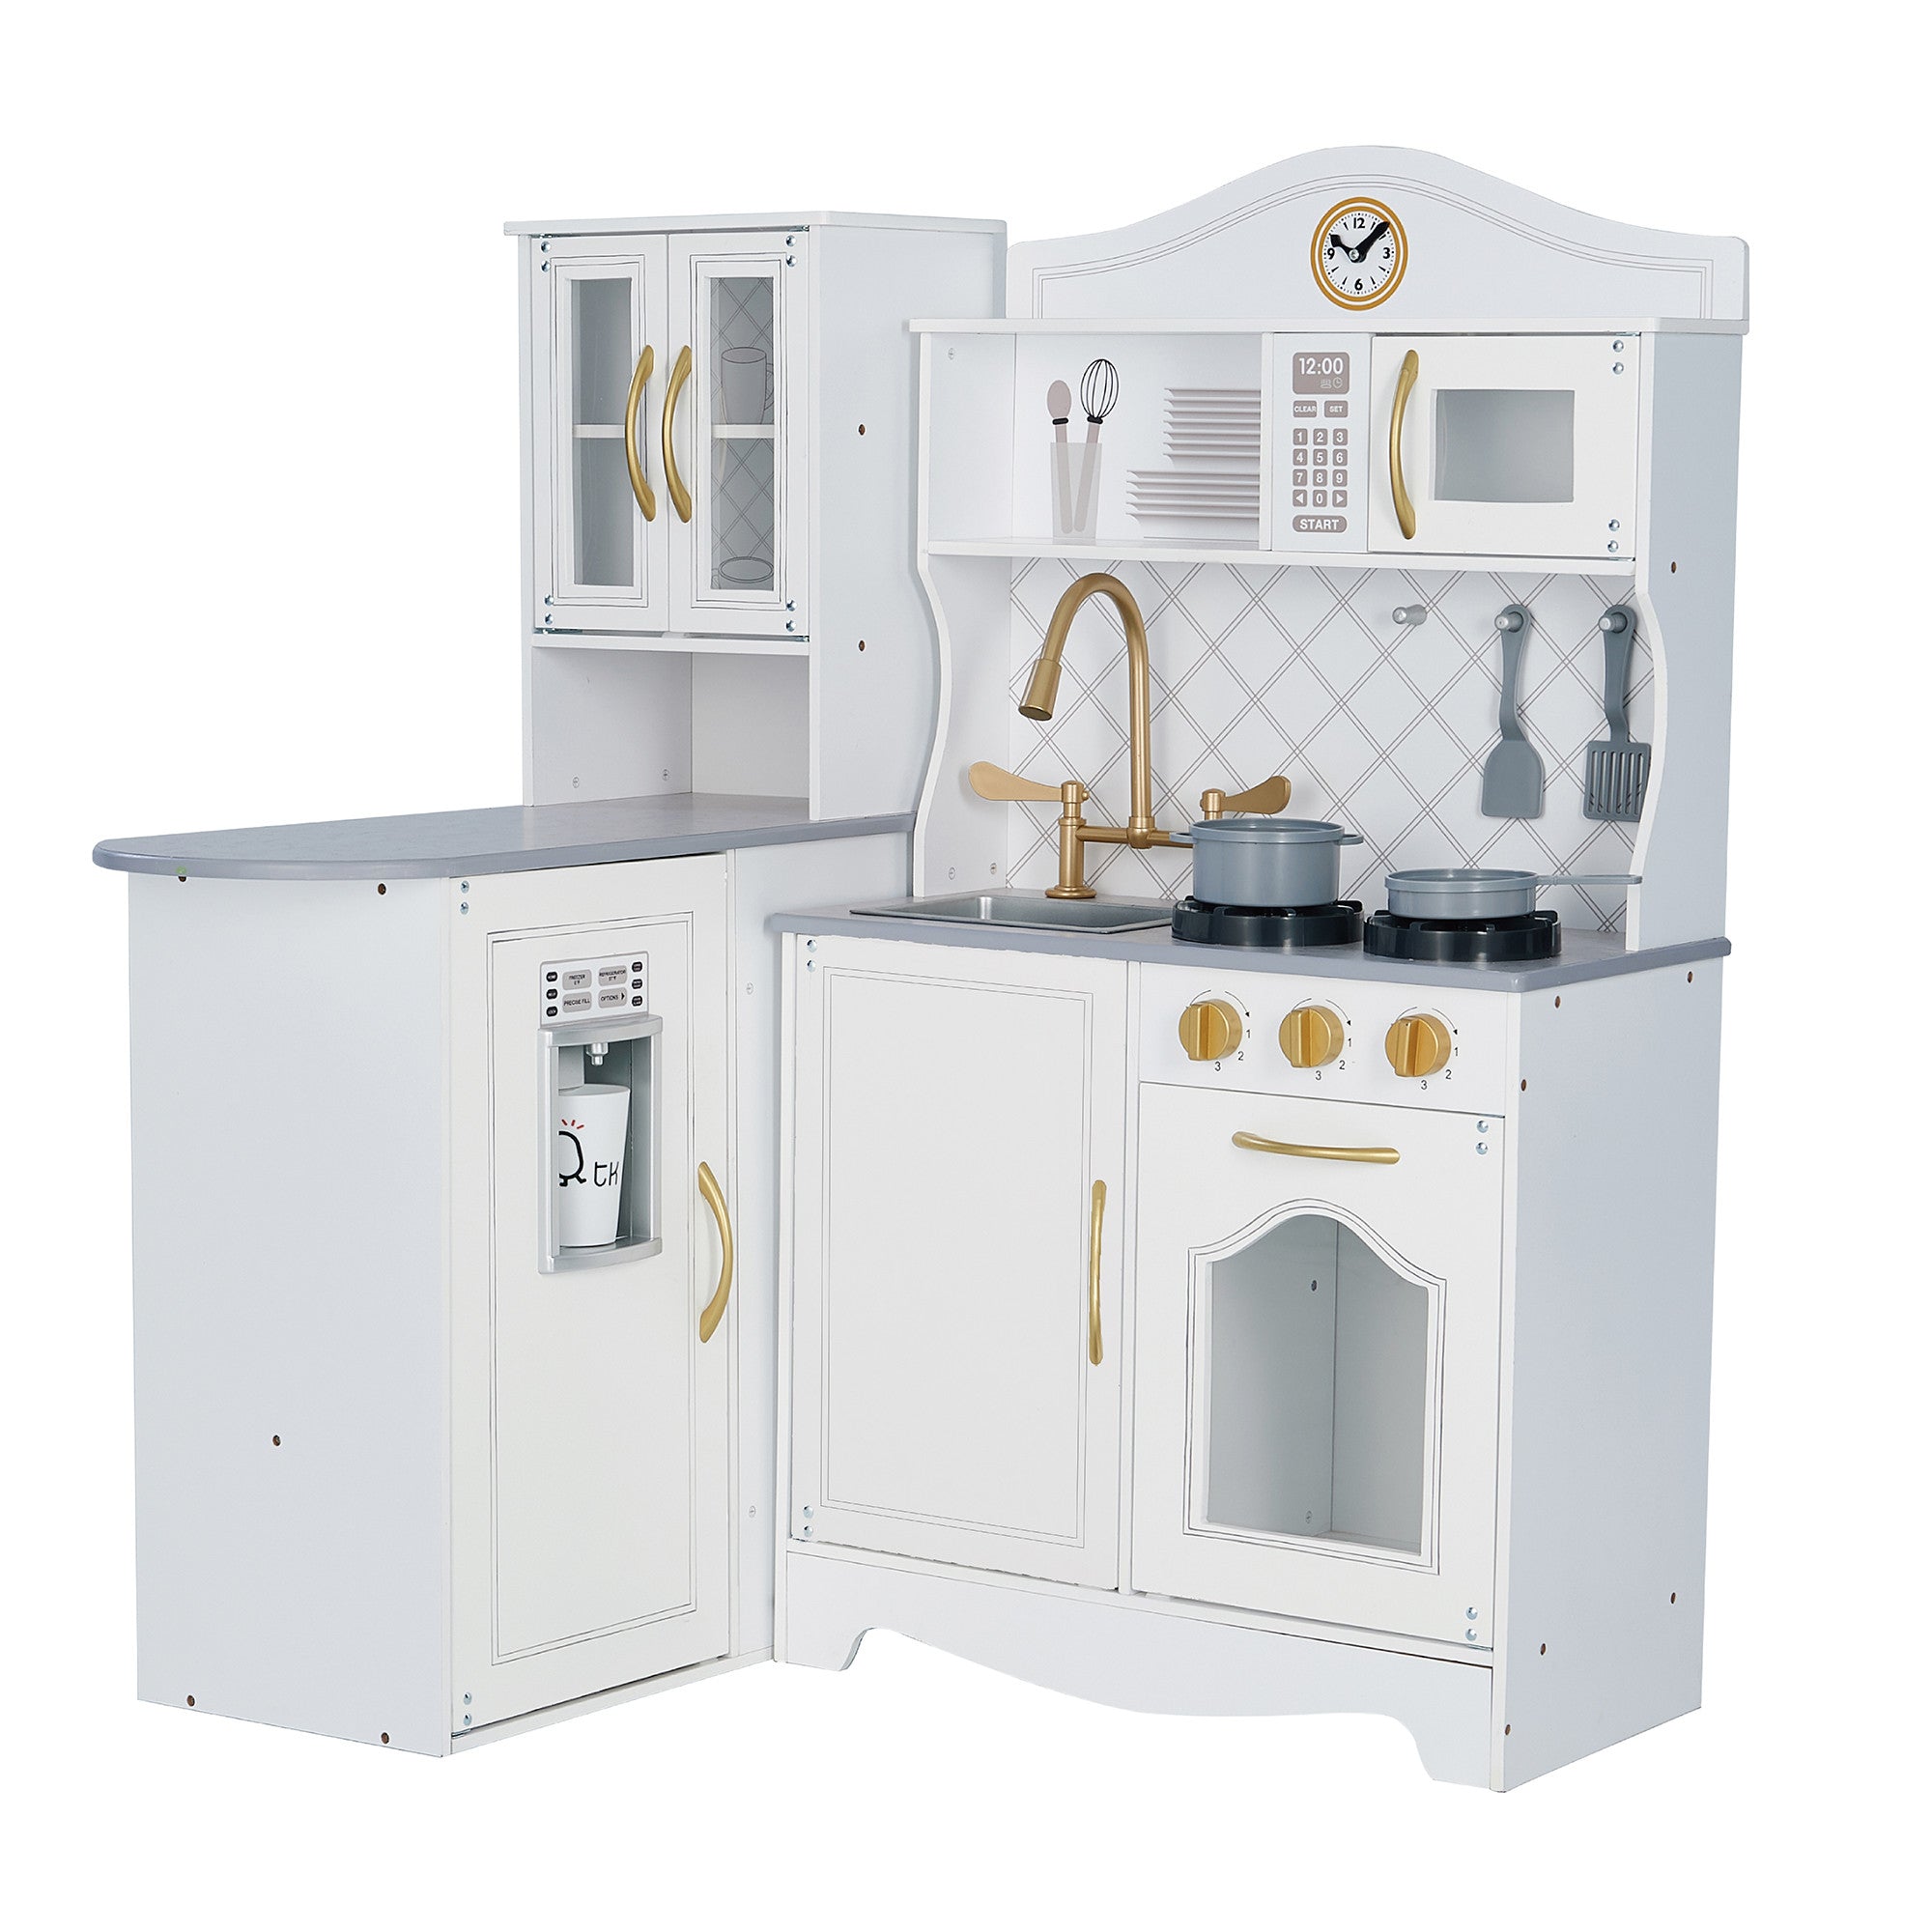 Little Chef Upper East Retro Play Kitchen with Effects, White